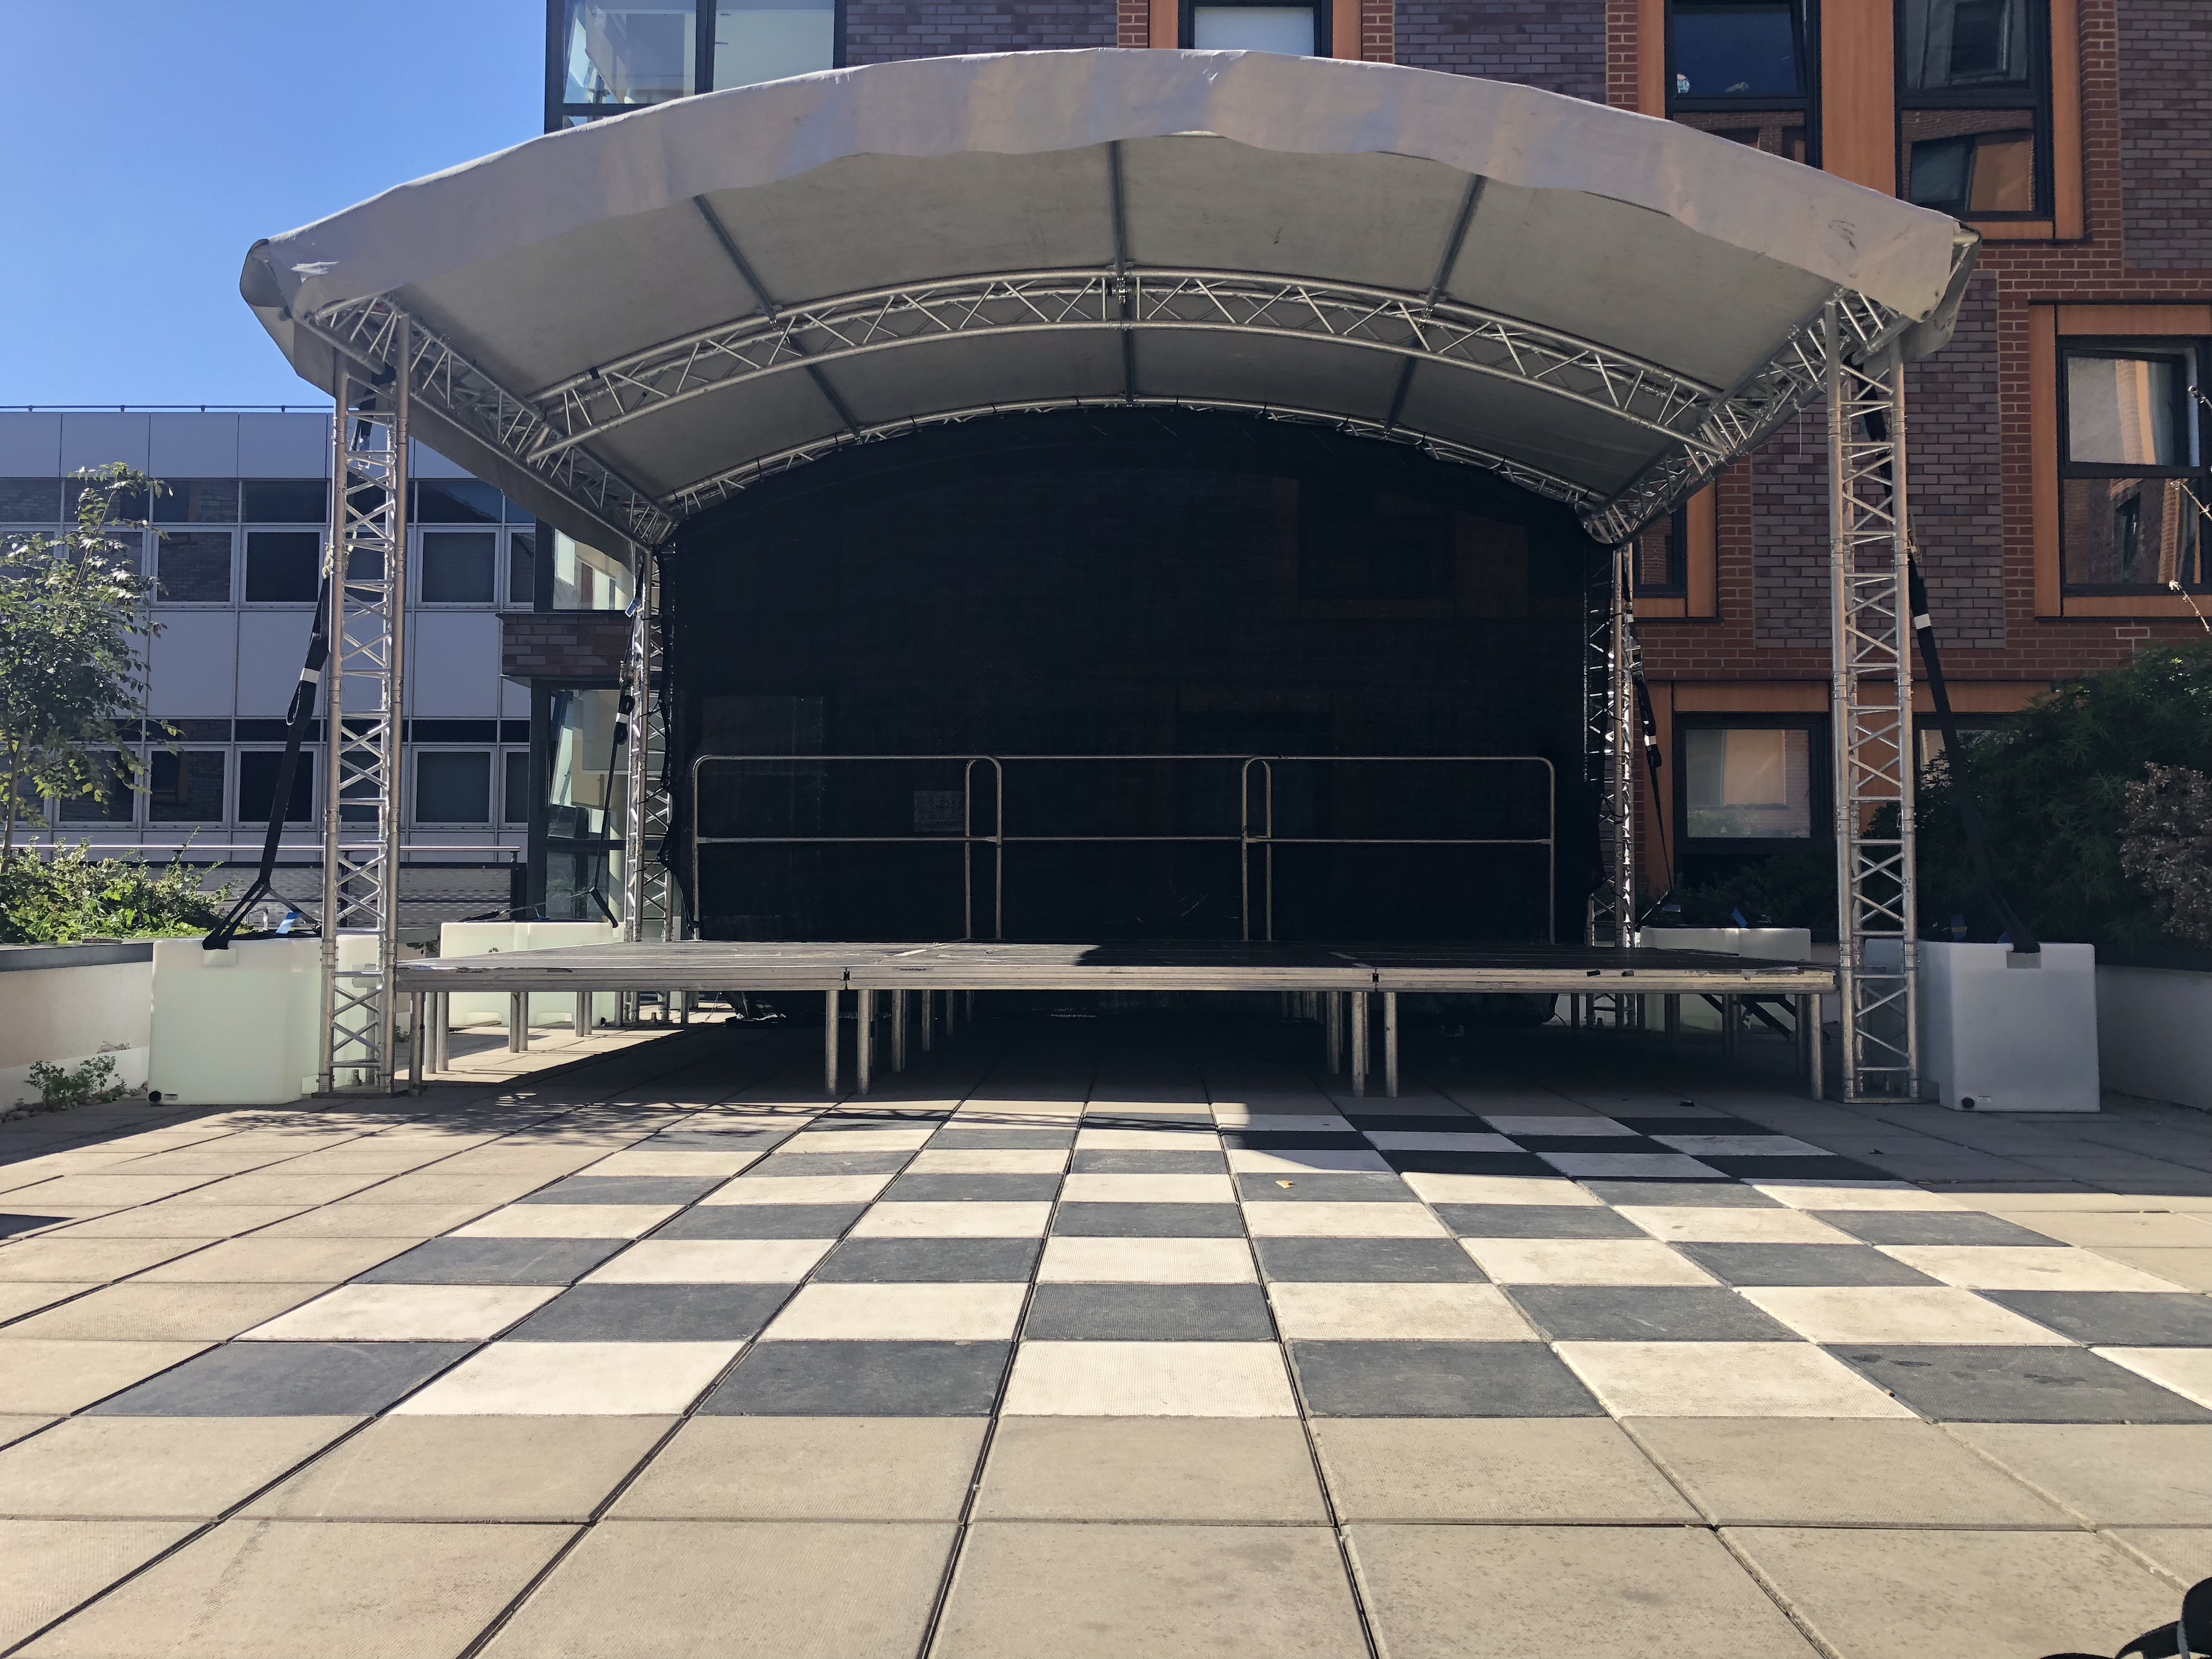 Small outdoor stage for a live music event held in London